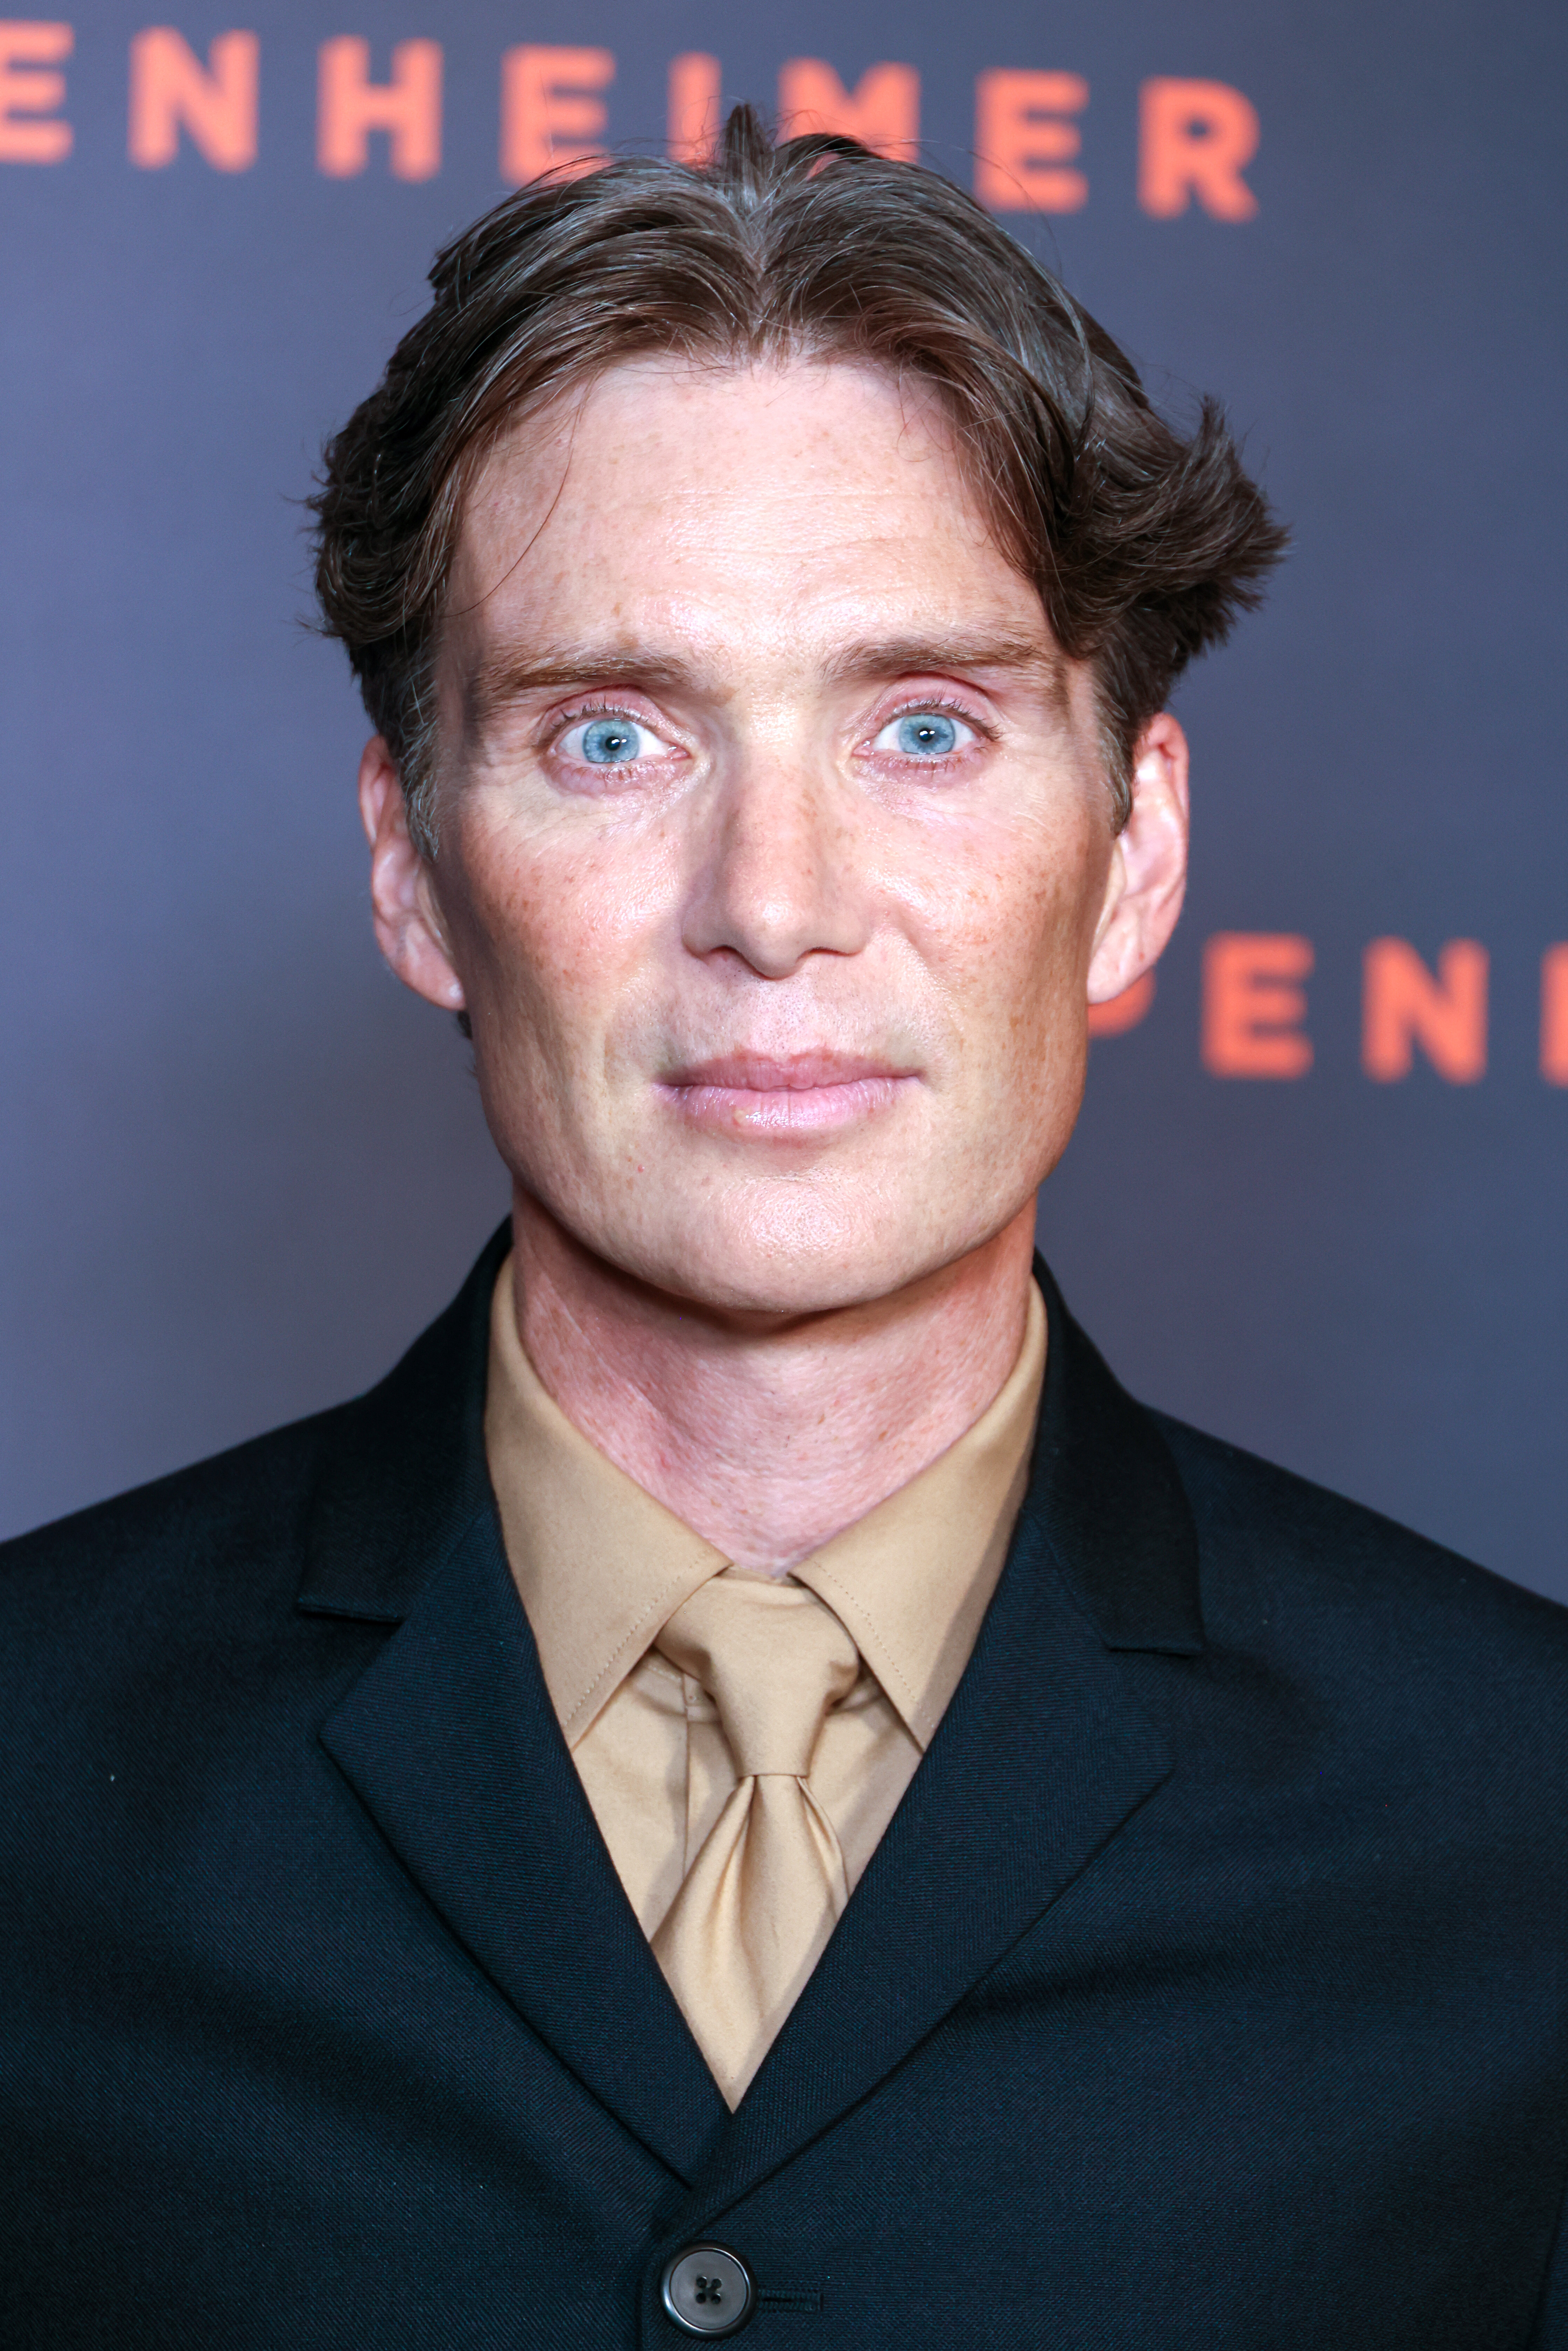 Cillian Murphy attends the premiere of "Oppenheimer," 2023. | Source: Getty Images